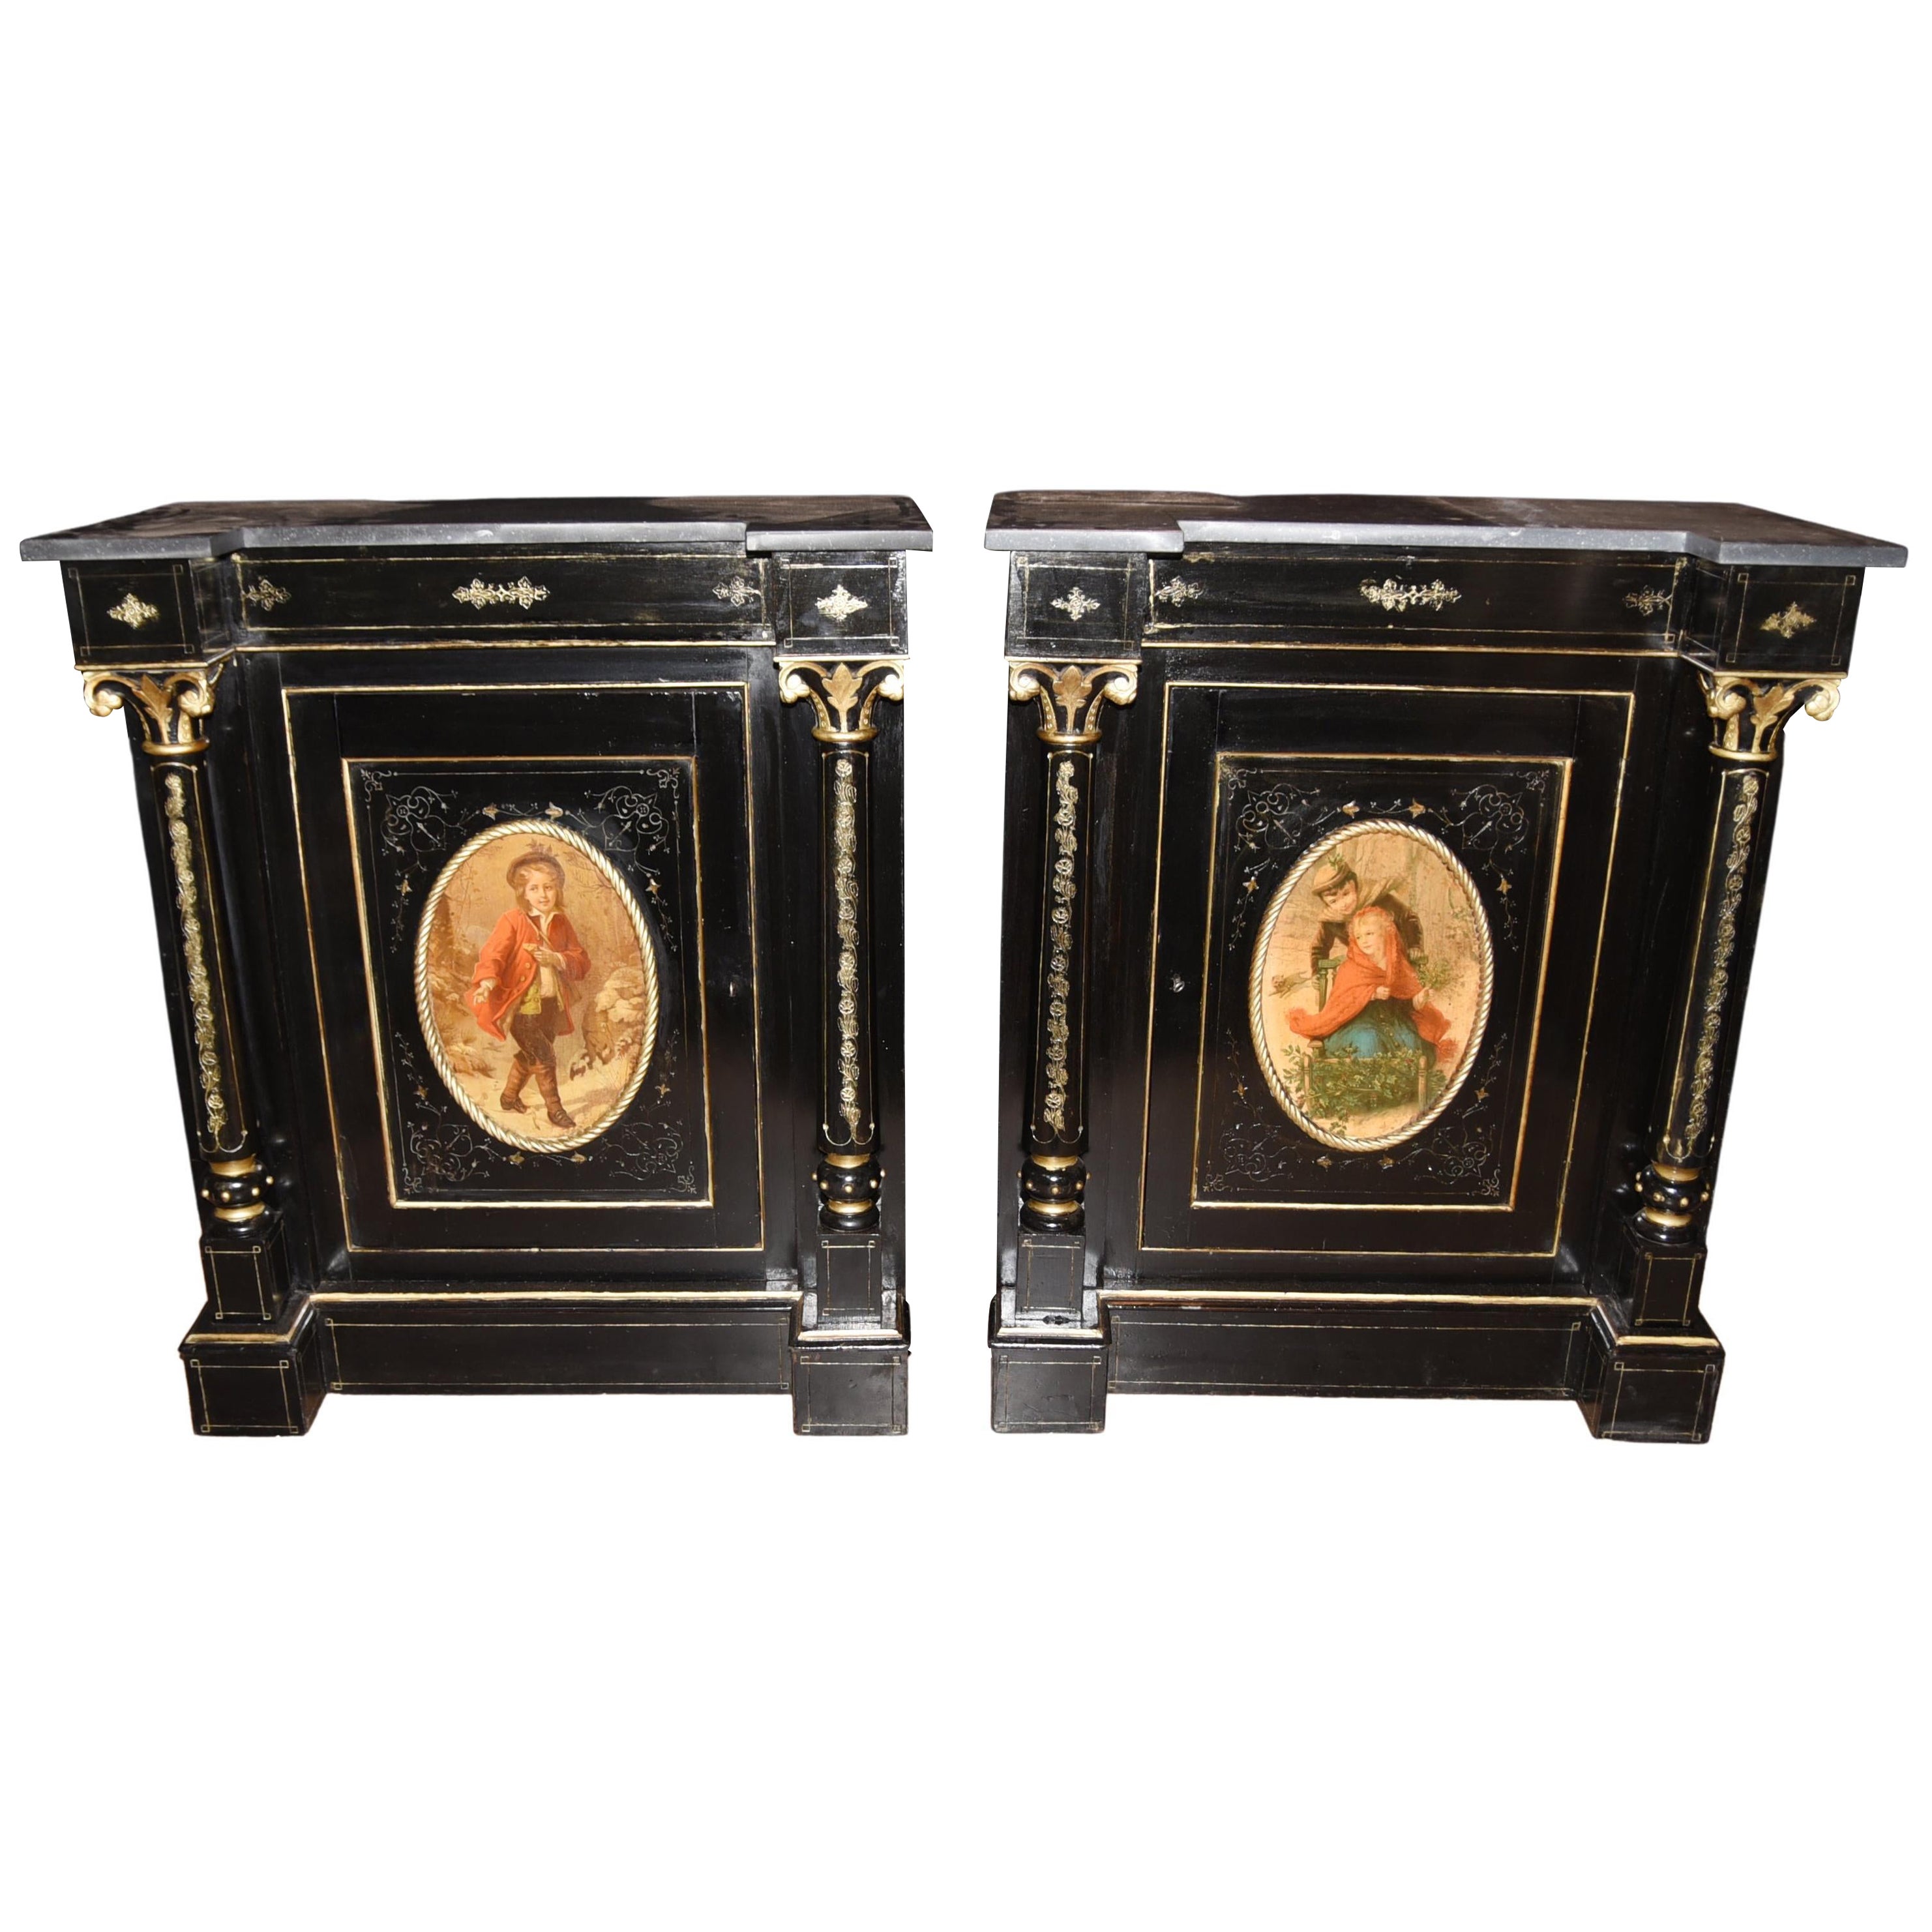 Pair Antique French Cabinets, Ebonized Painted Plaques Credenza Sideboard